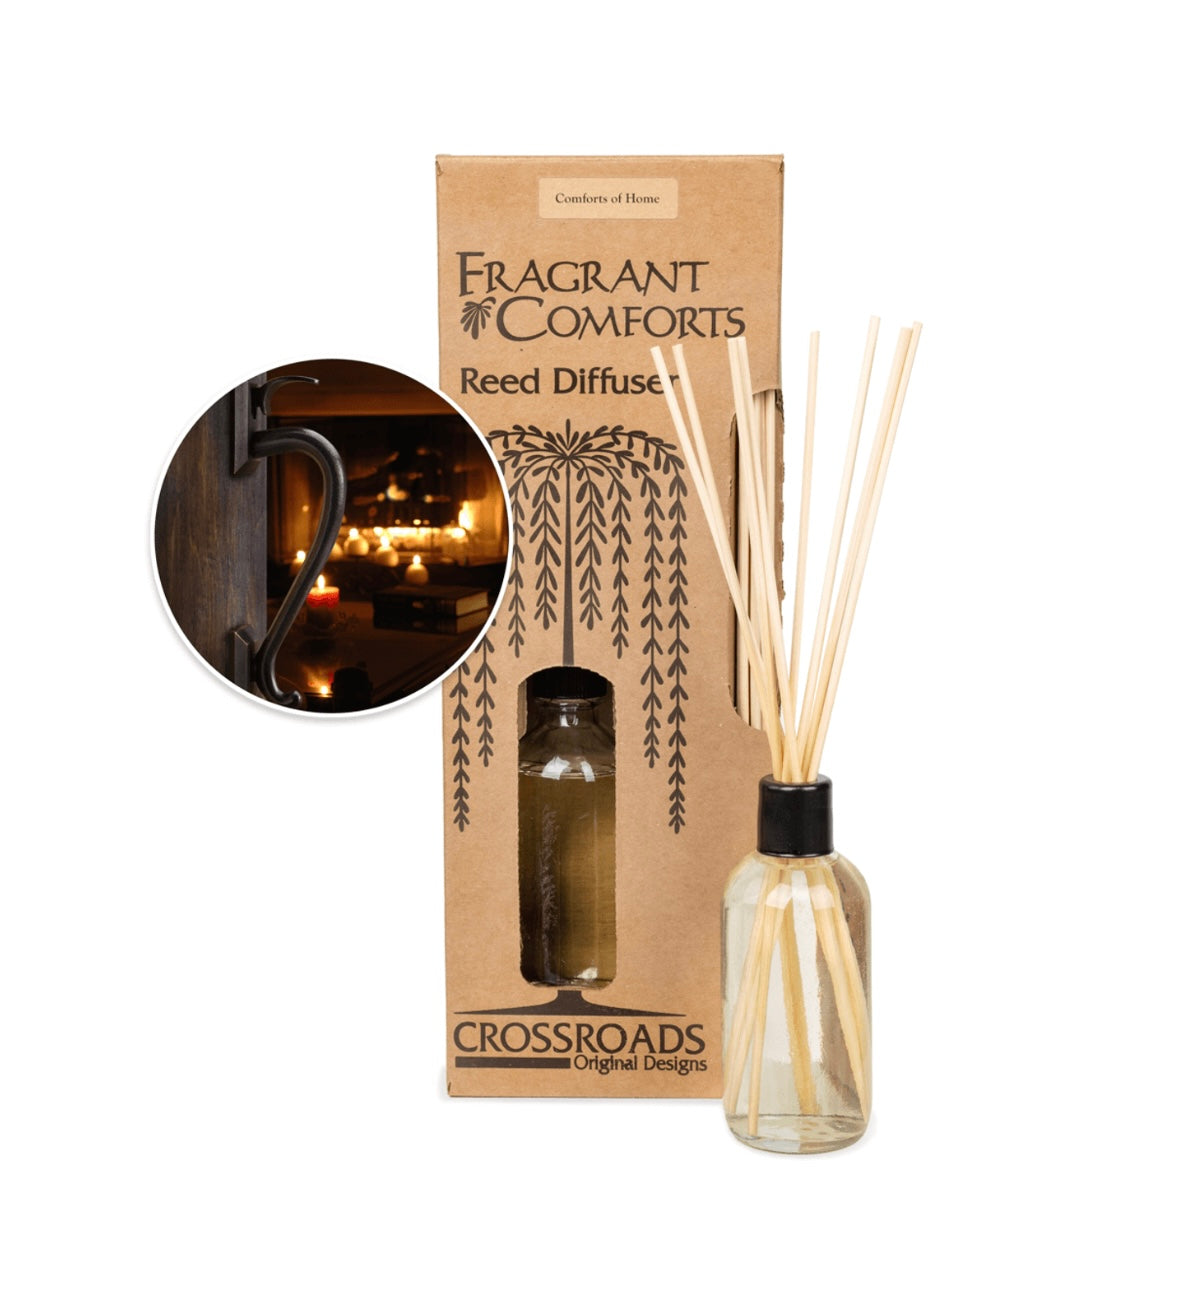 Comforts of Home Reed Diffuser